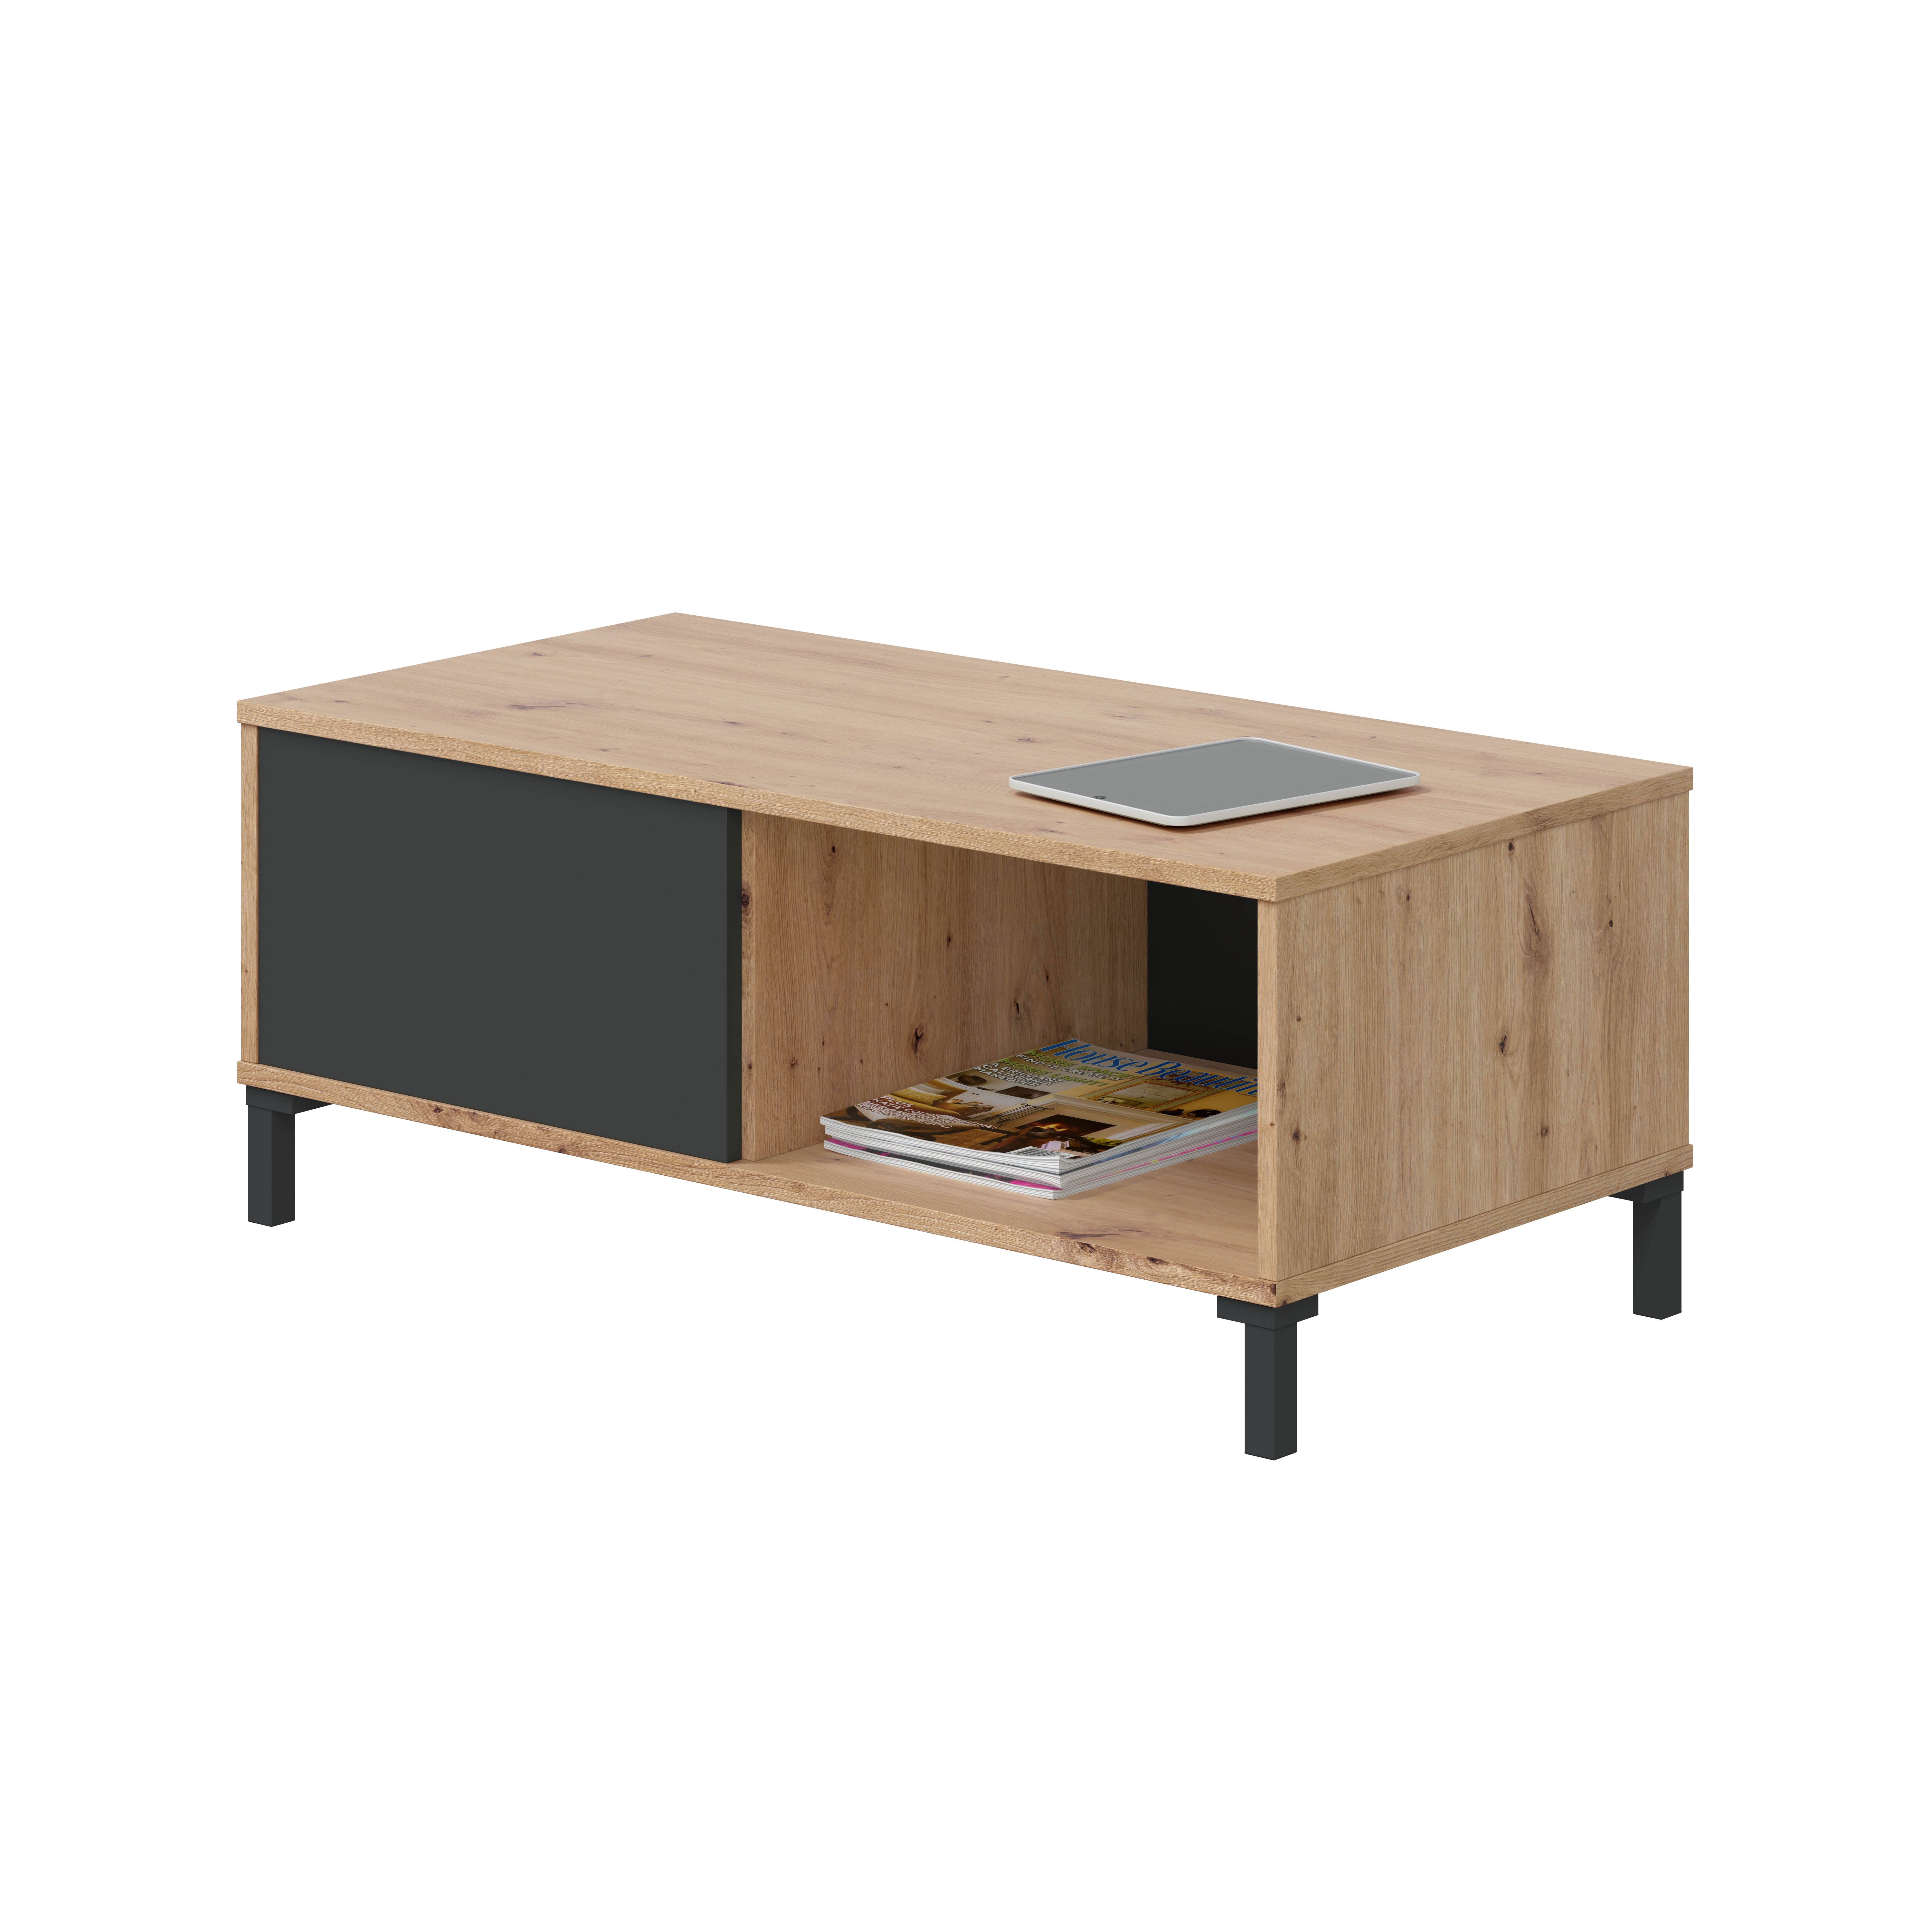 FORES BROOKLYN COFFEE TABLE H40xW100xD50cm